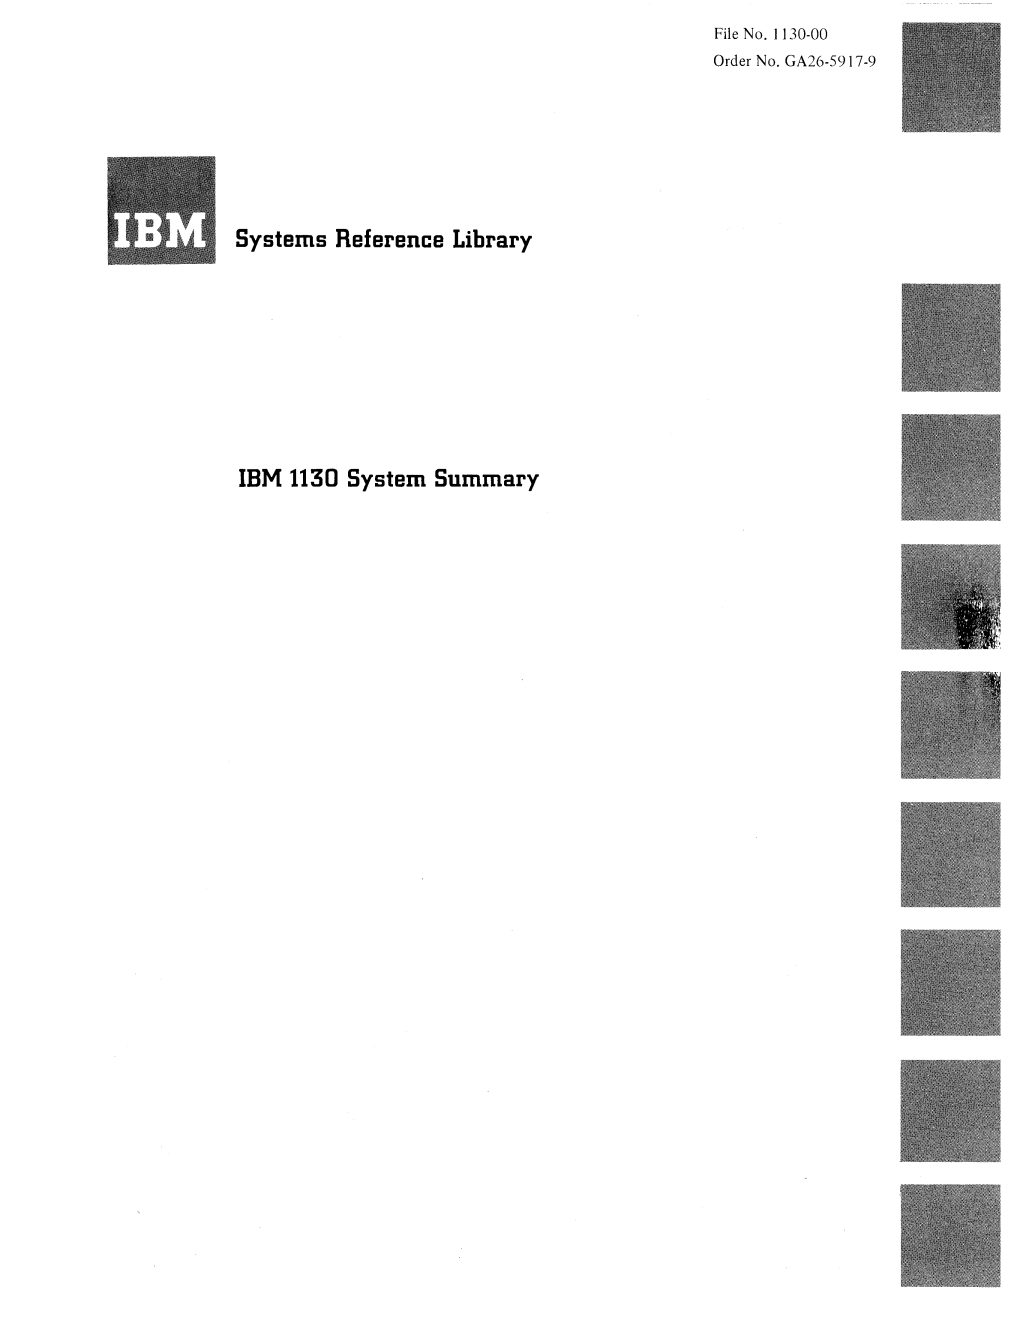 Systems Reference Library IBM 1130 System Summary